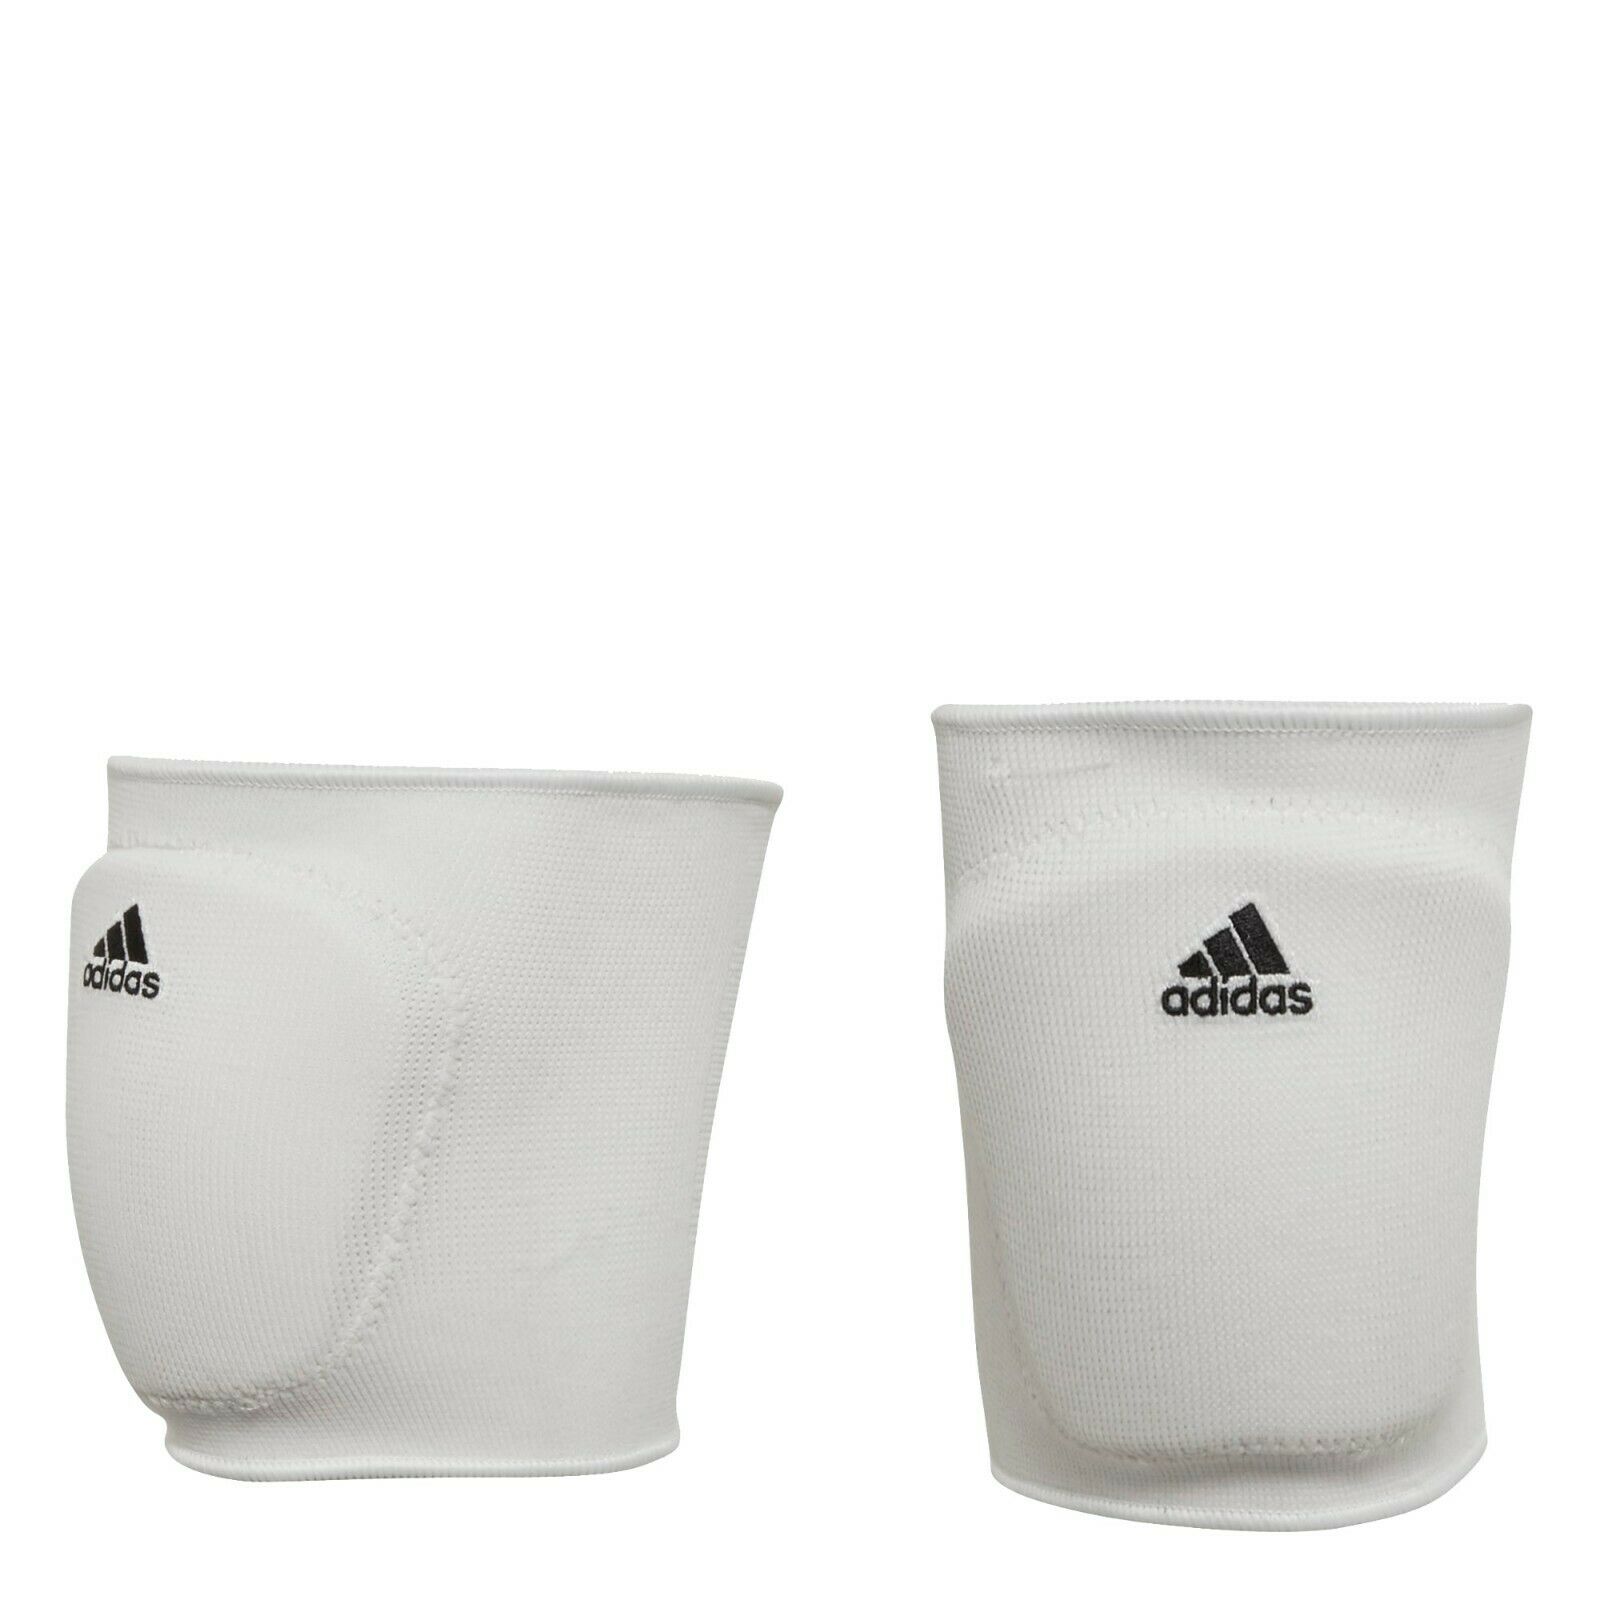 Adidas 5-inch Kp Womens Volleyball Knee Pads White S98578 Size Small New